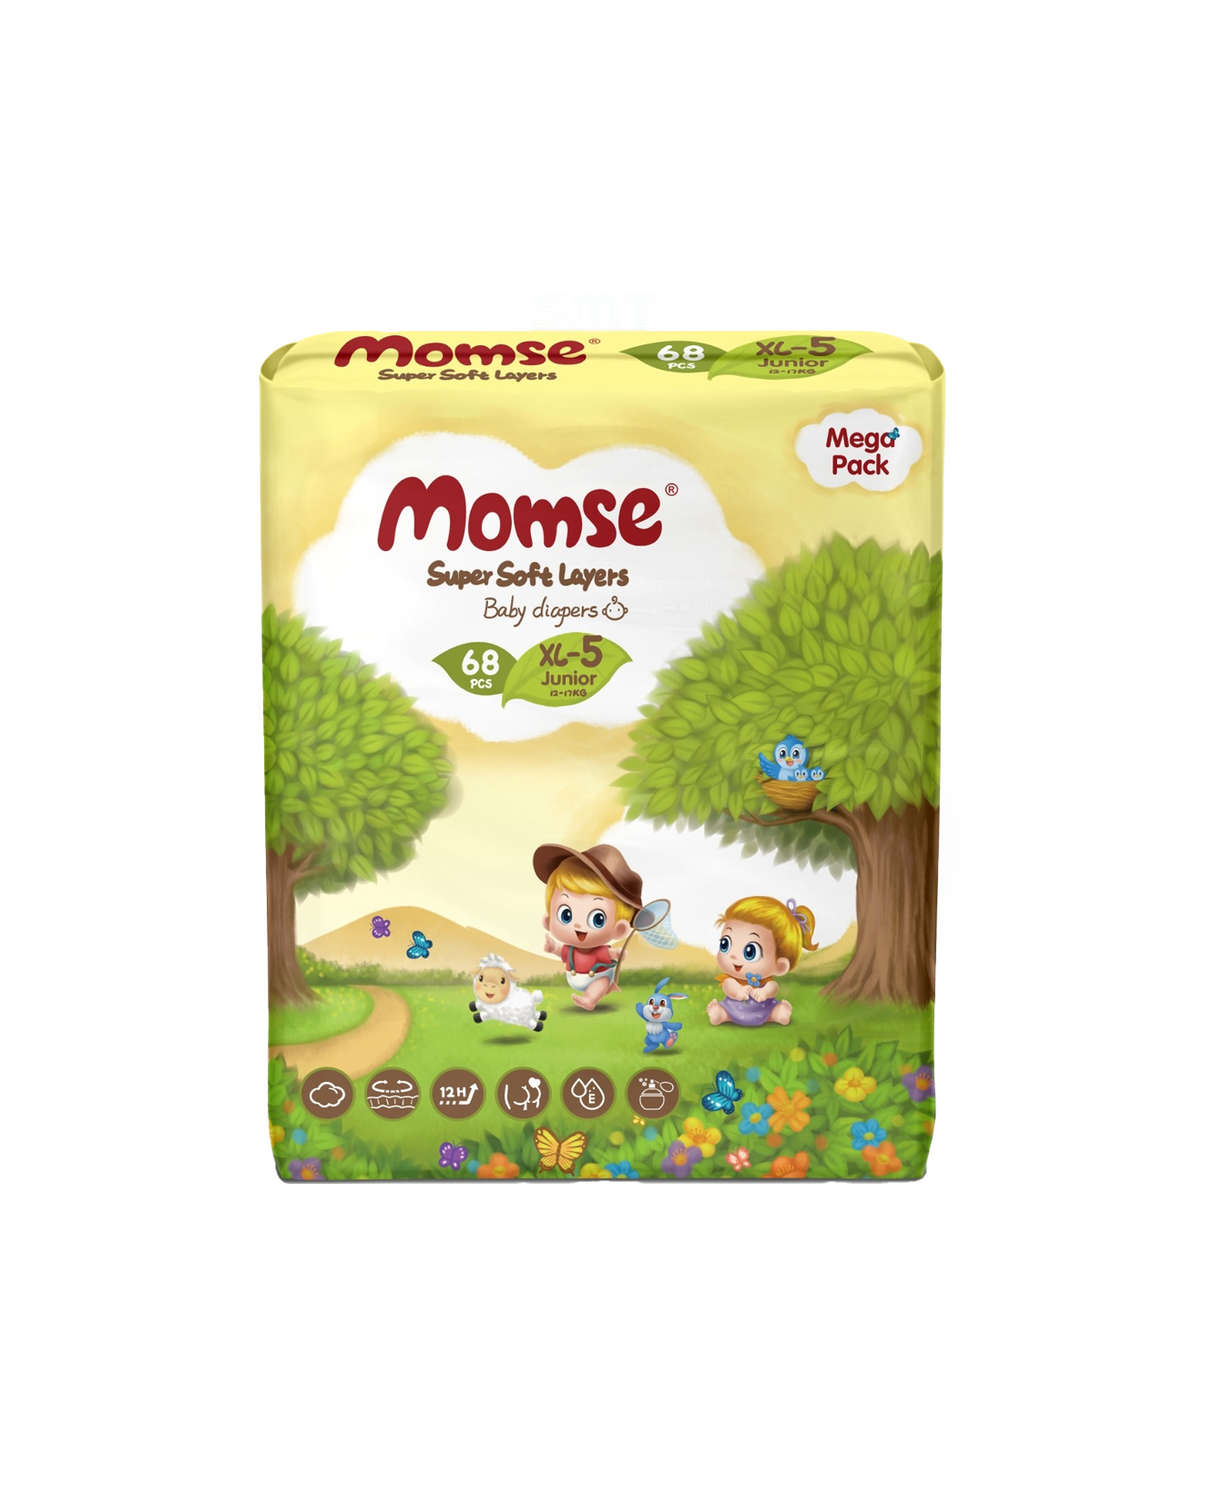 momse diapers mega pack xl-5 68pc